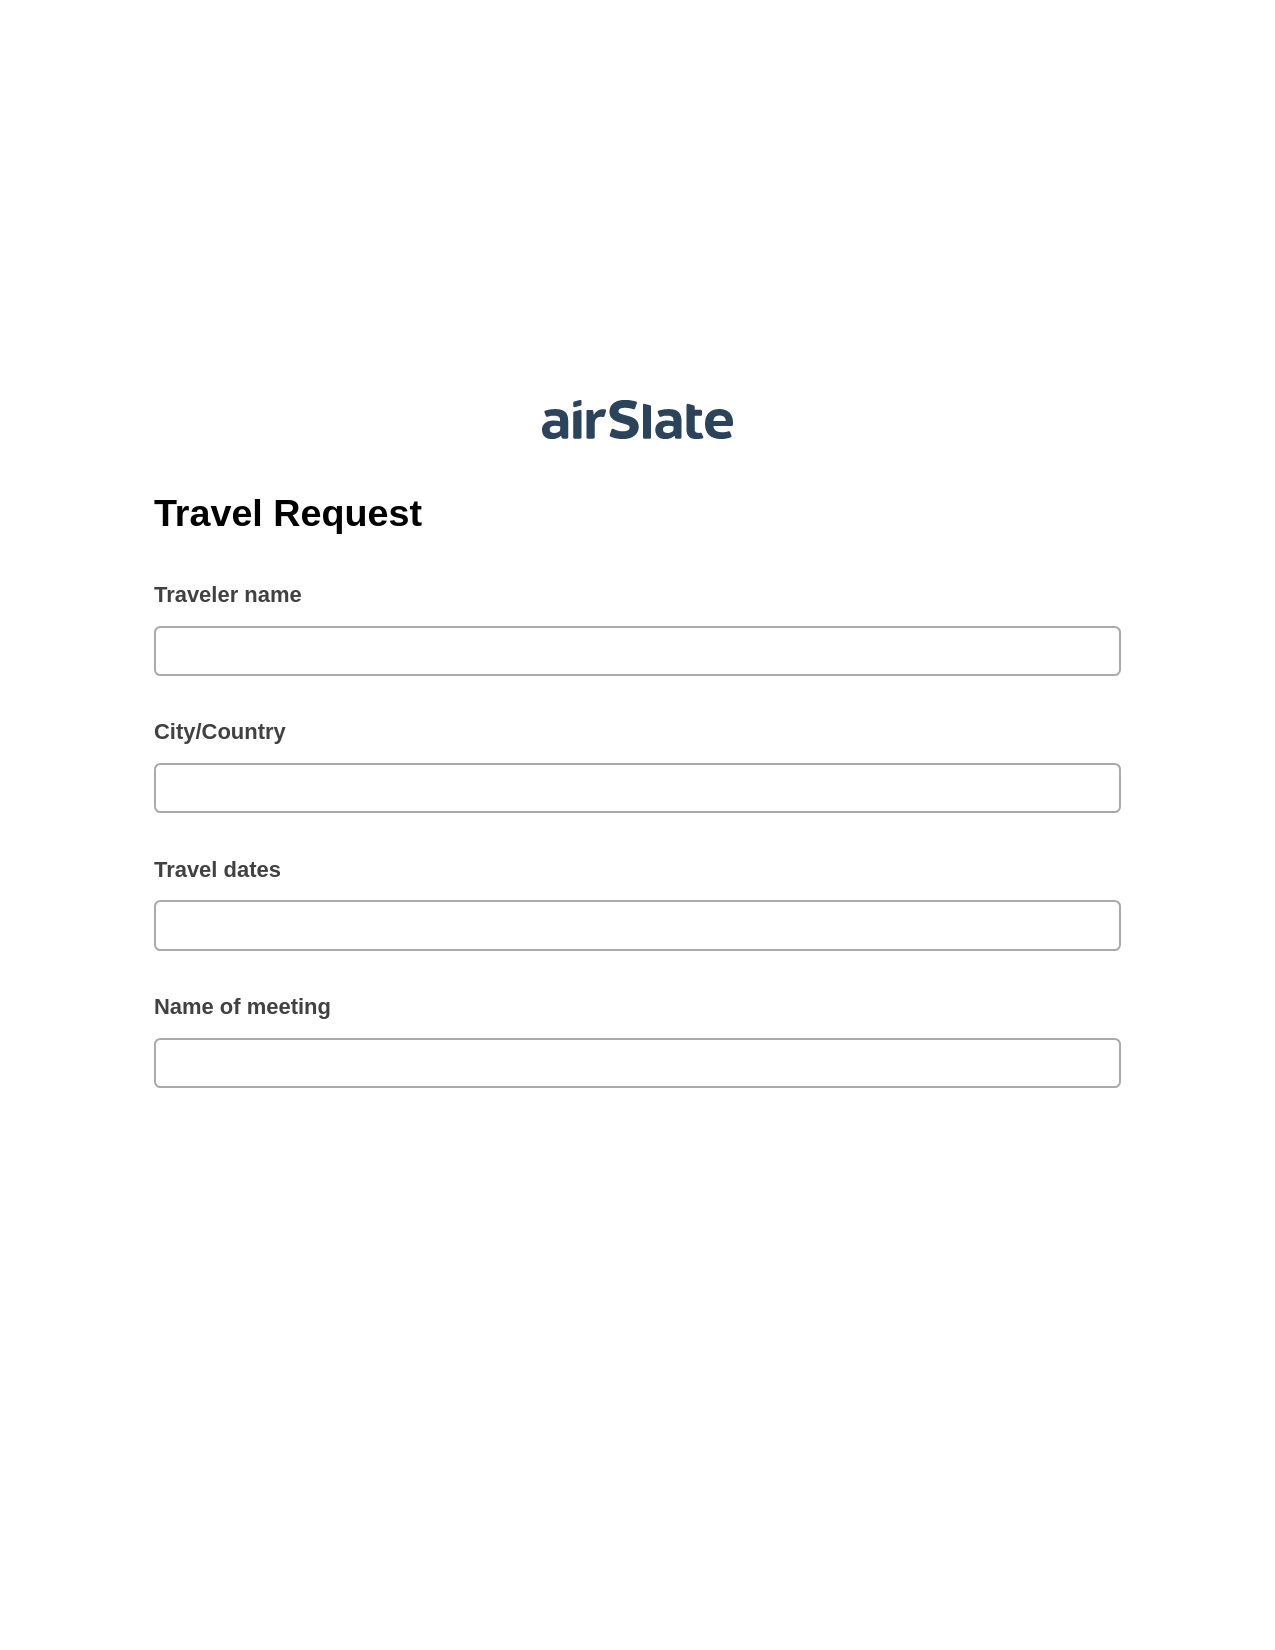 Travel Request Pre-fill Dropdown from Airtable, Reminder Bot, Export to Google Sheet Bot